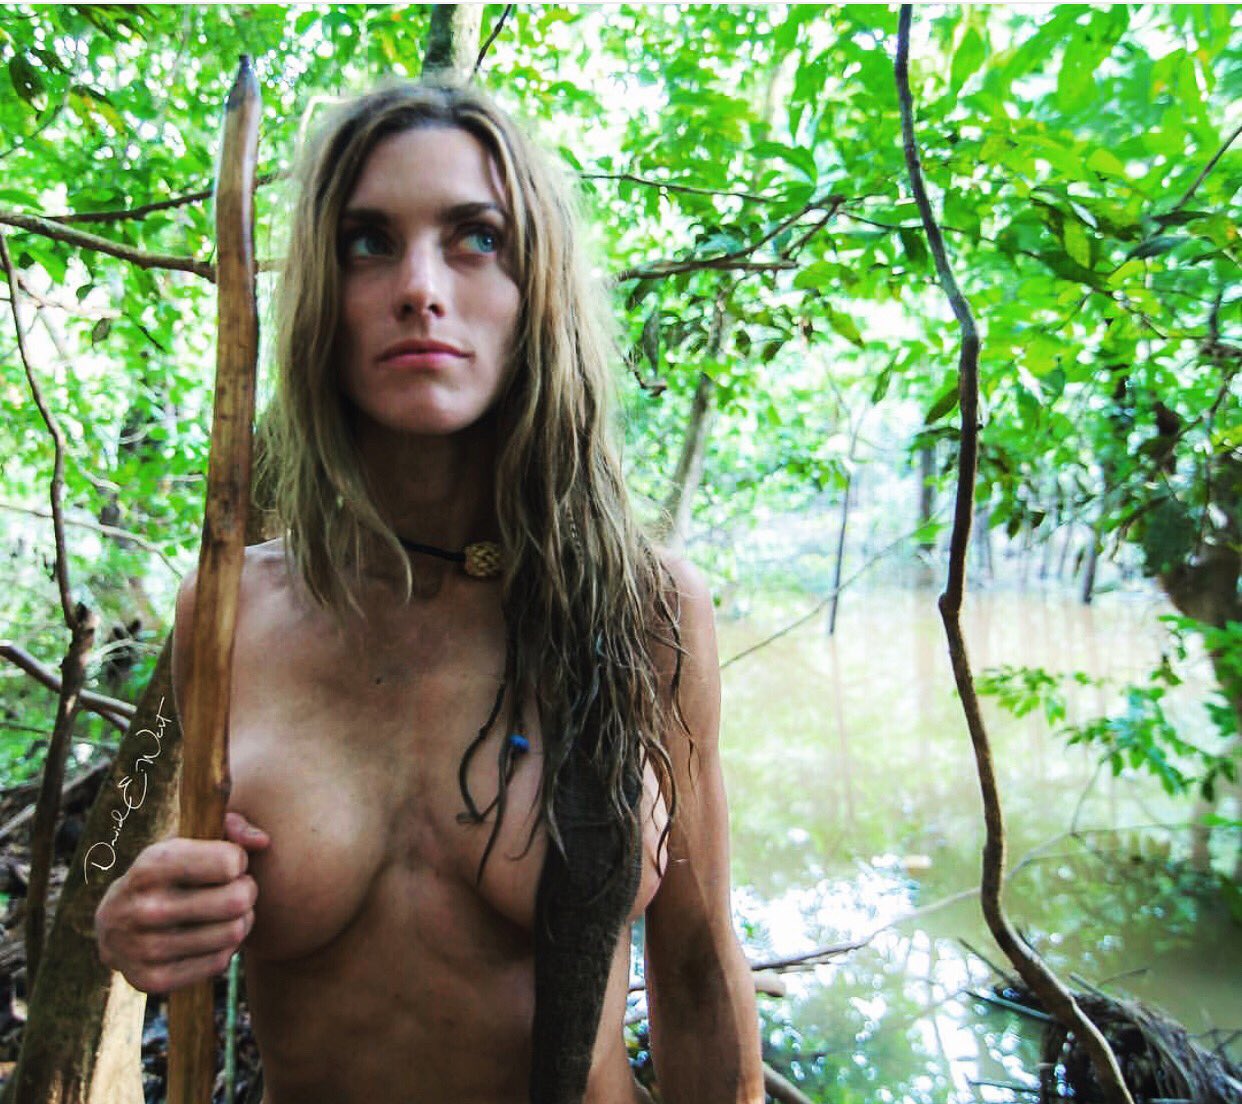 Melissa miller naked and afraid nude ❤️ Best adult photos at doai hq picture